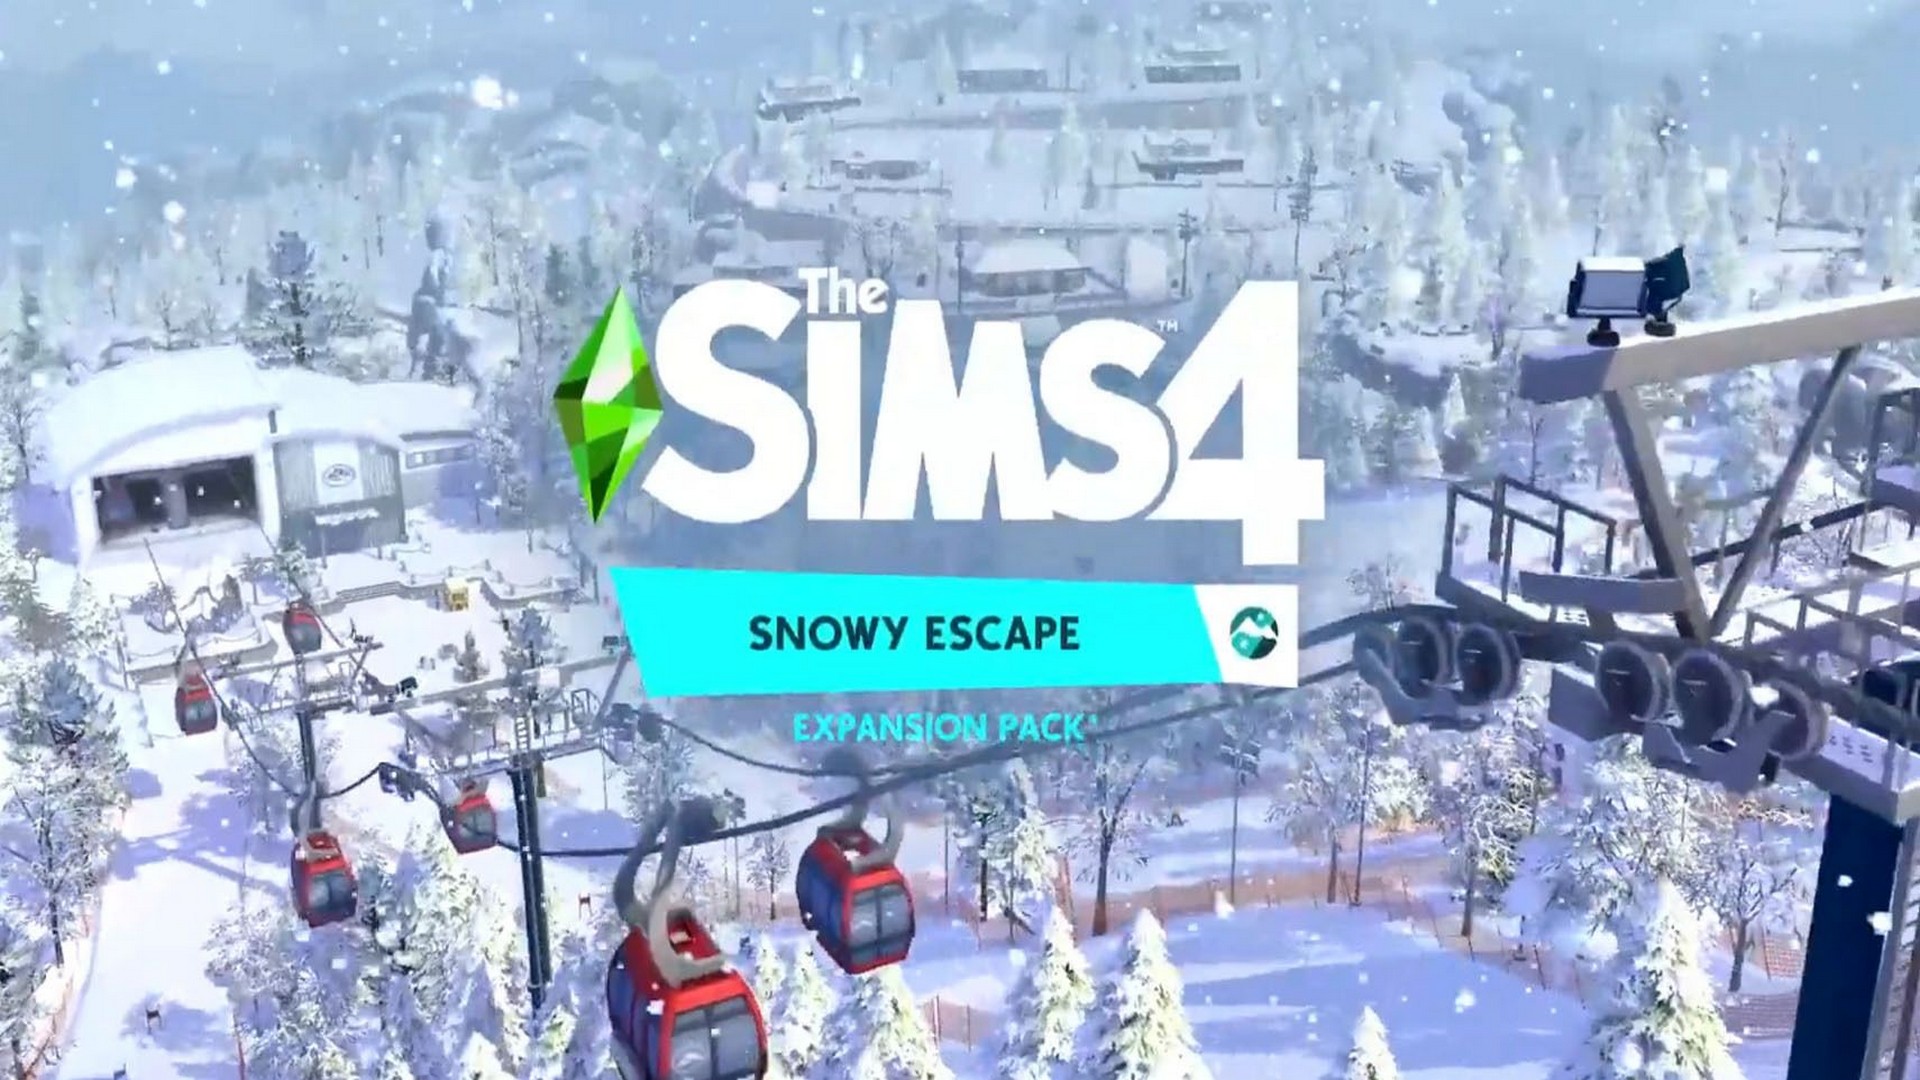 Bundle Up For The Ultimate Winter Getaway In The SIMS 4 Snowy Escape, Available November 13